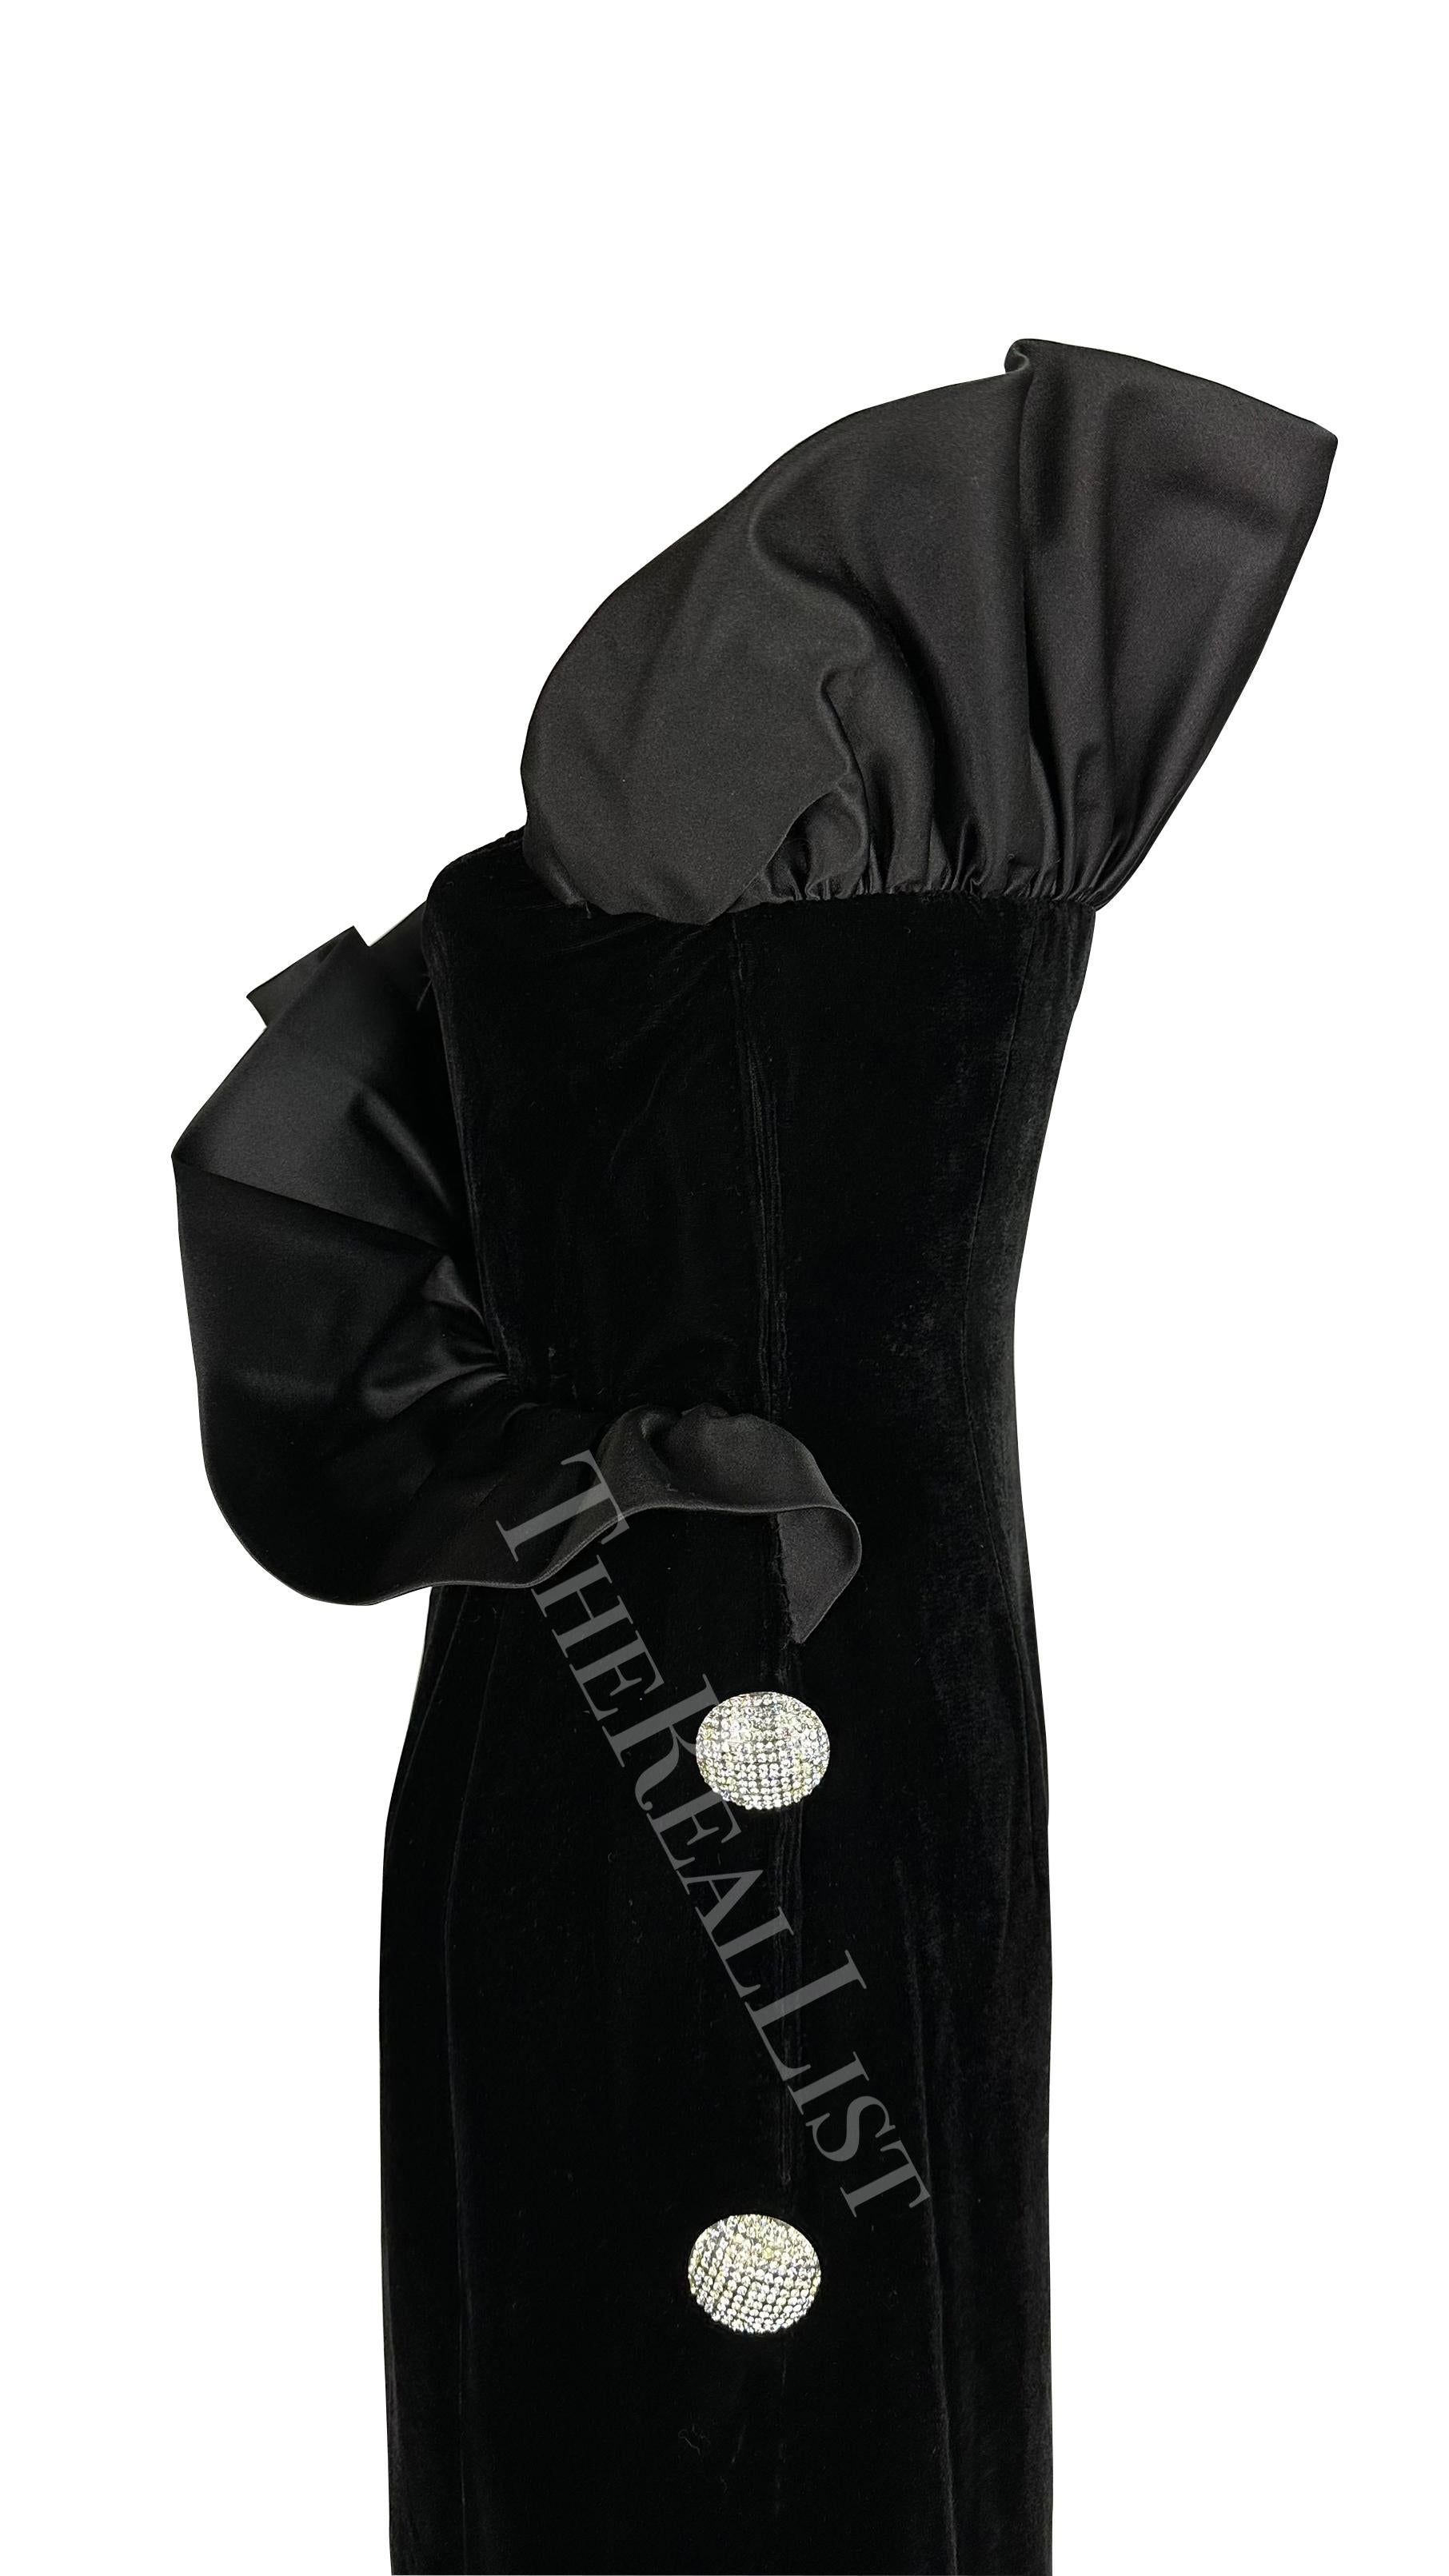 Presenting a fabulous black velvet Givenchy gown. Designed by Hubert de Givenchy for his Fall/Winter 1987 collection, this full-length gown is constructed of luxurious black velvet and features an upward-facing structured satin ruffle that wraps